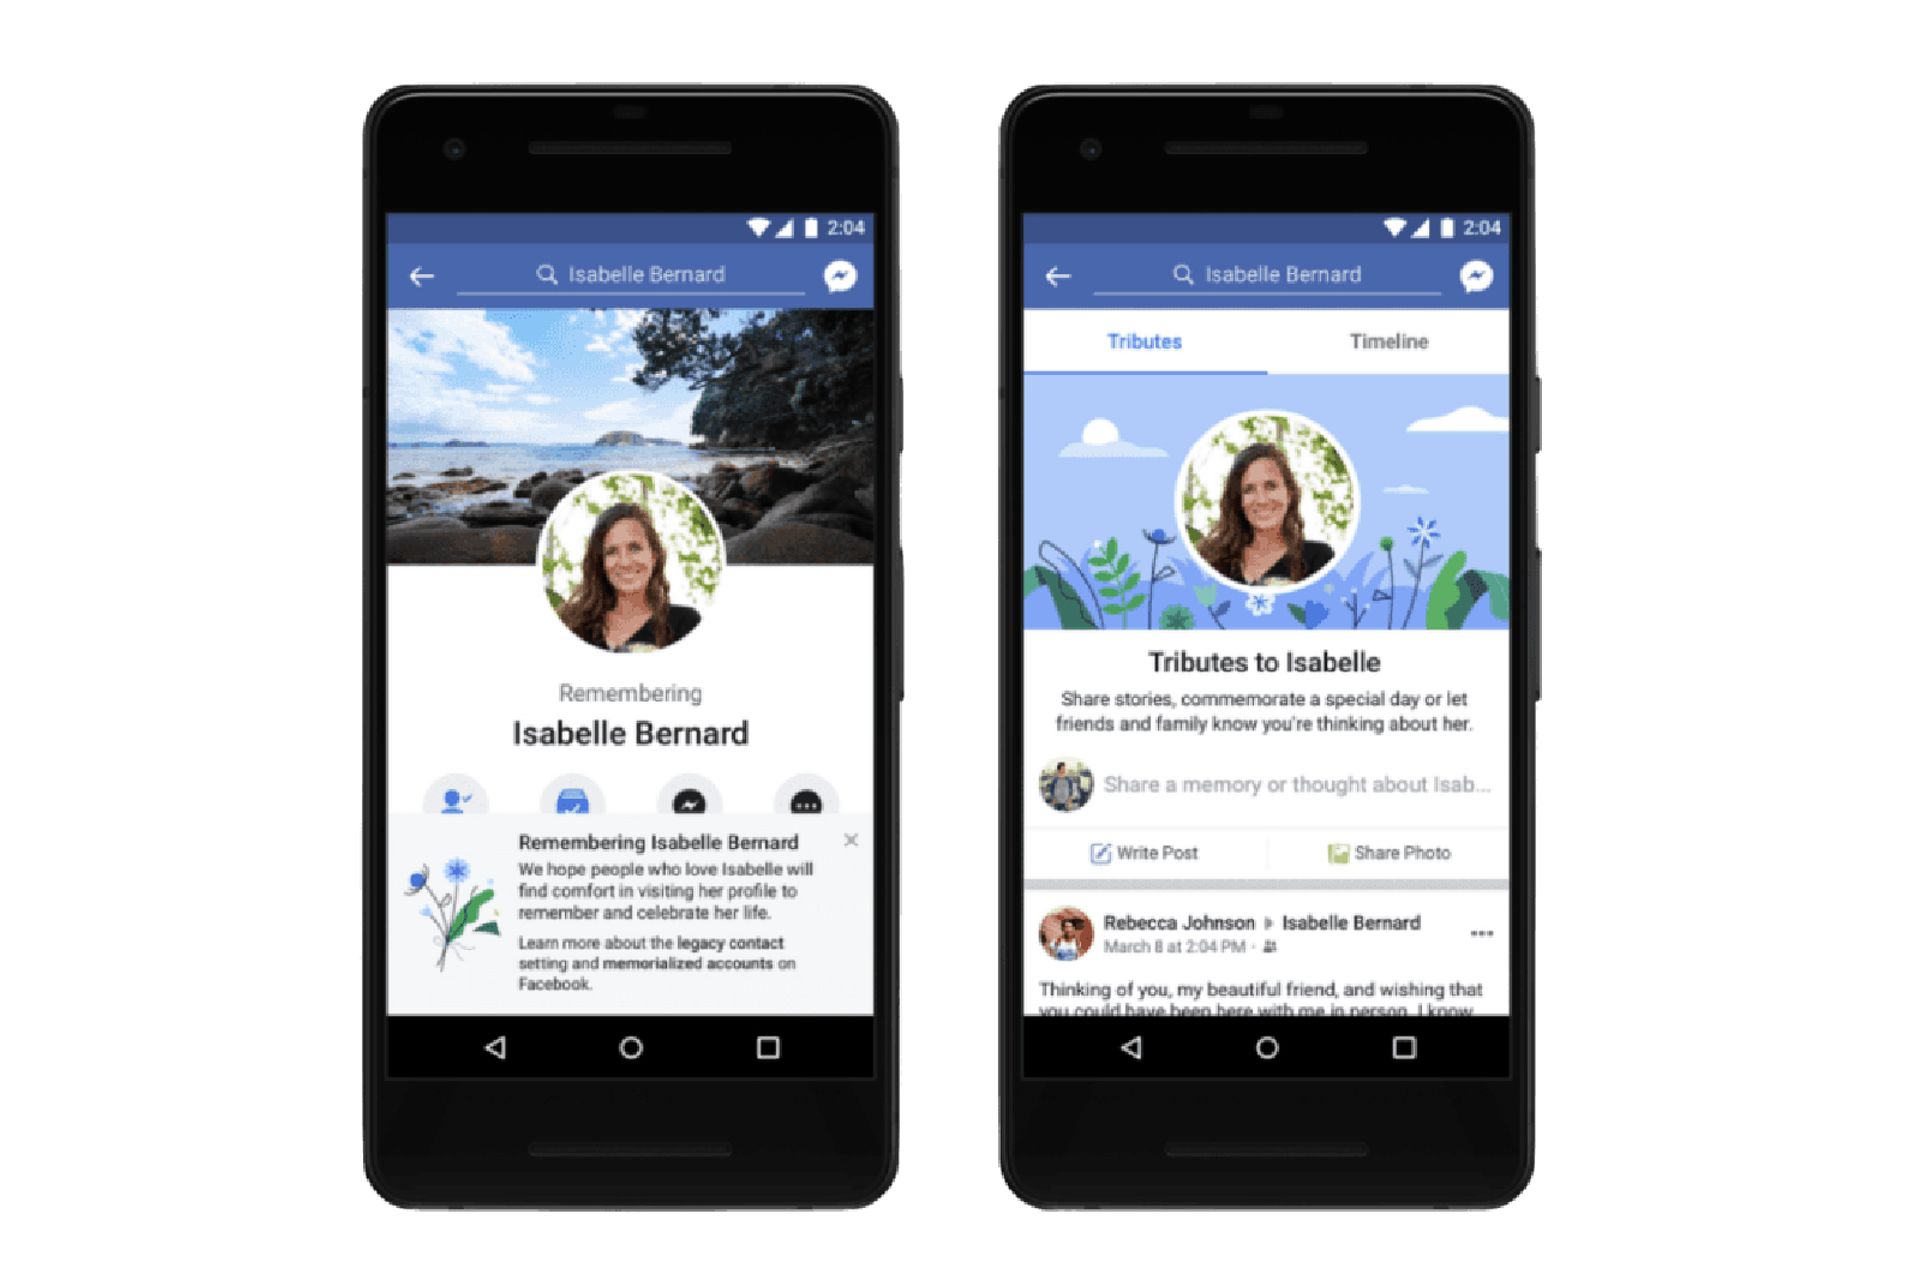 Facebook offers the option to memorialise an account of someone who has died, adding a 